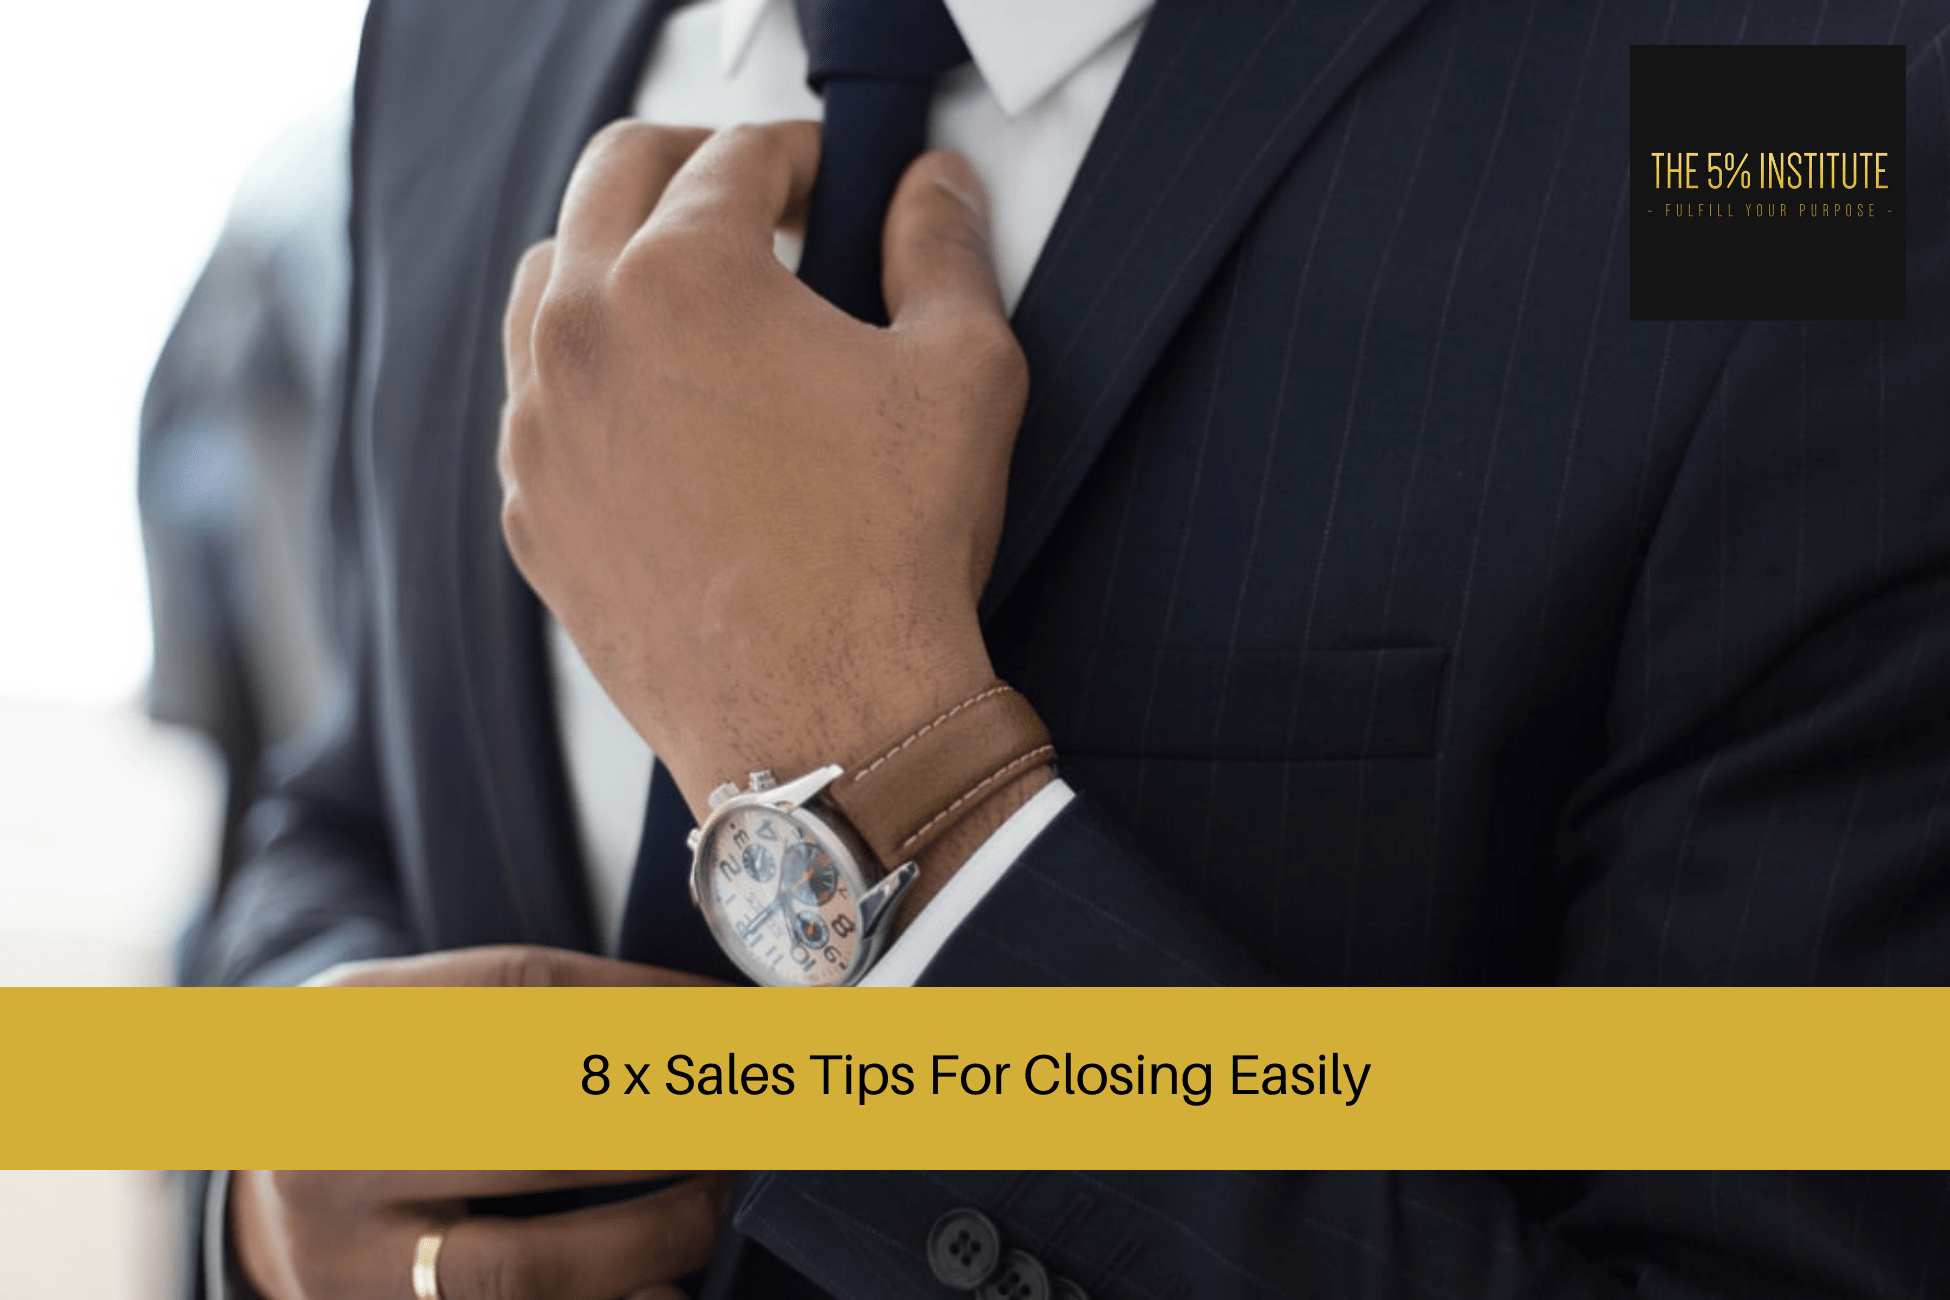 8 x Sales Tips For Closing Easily